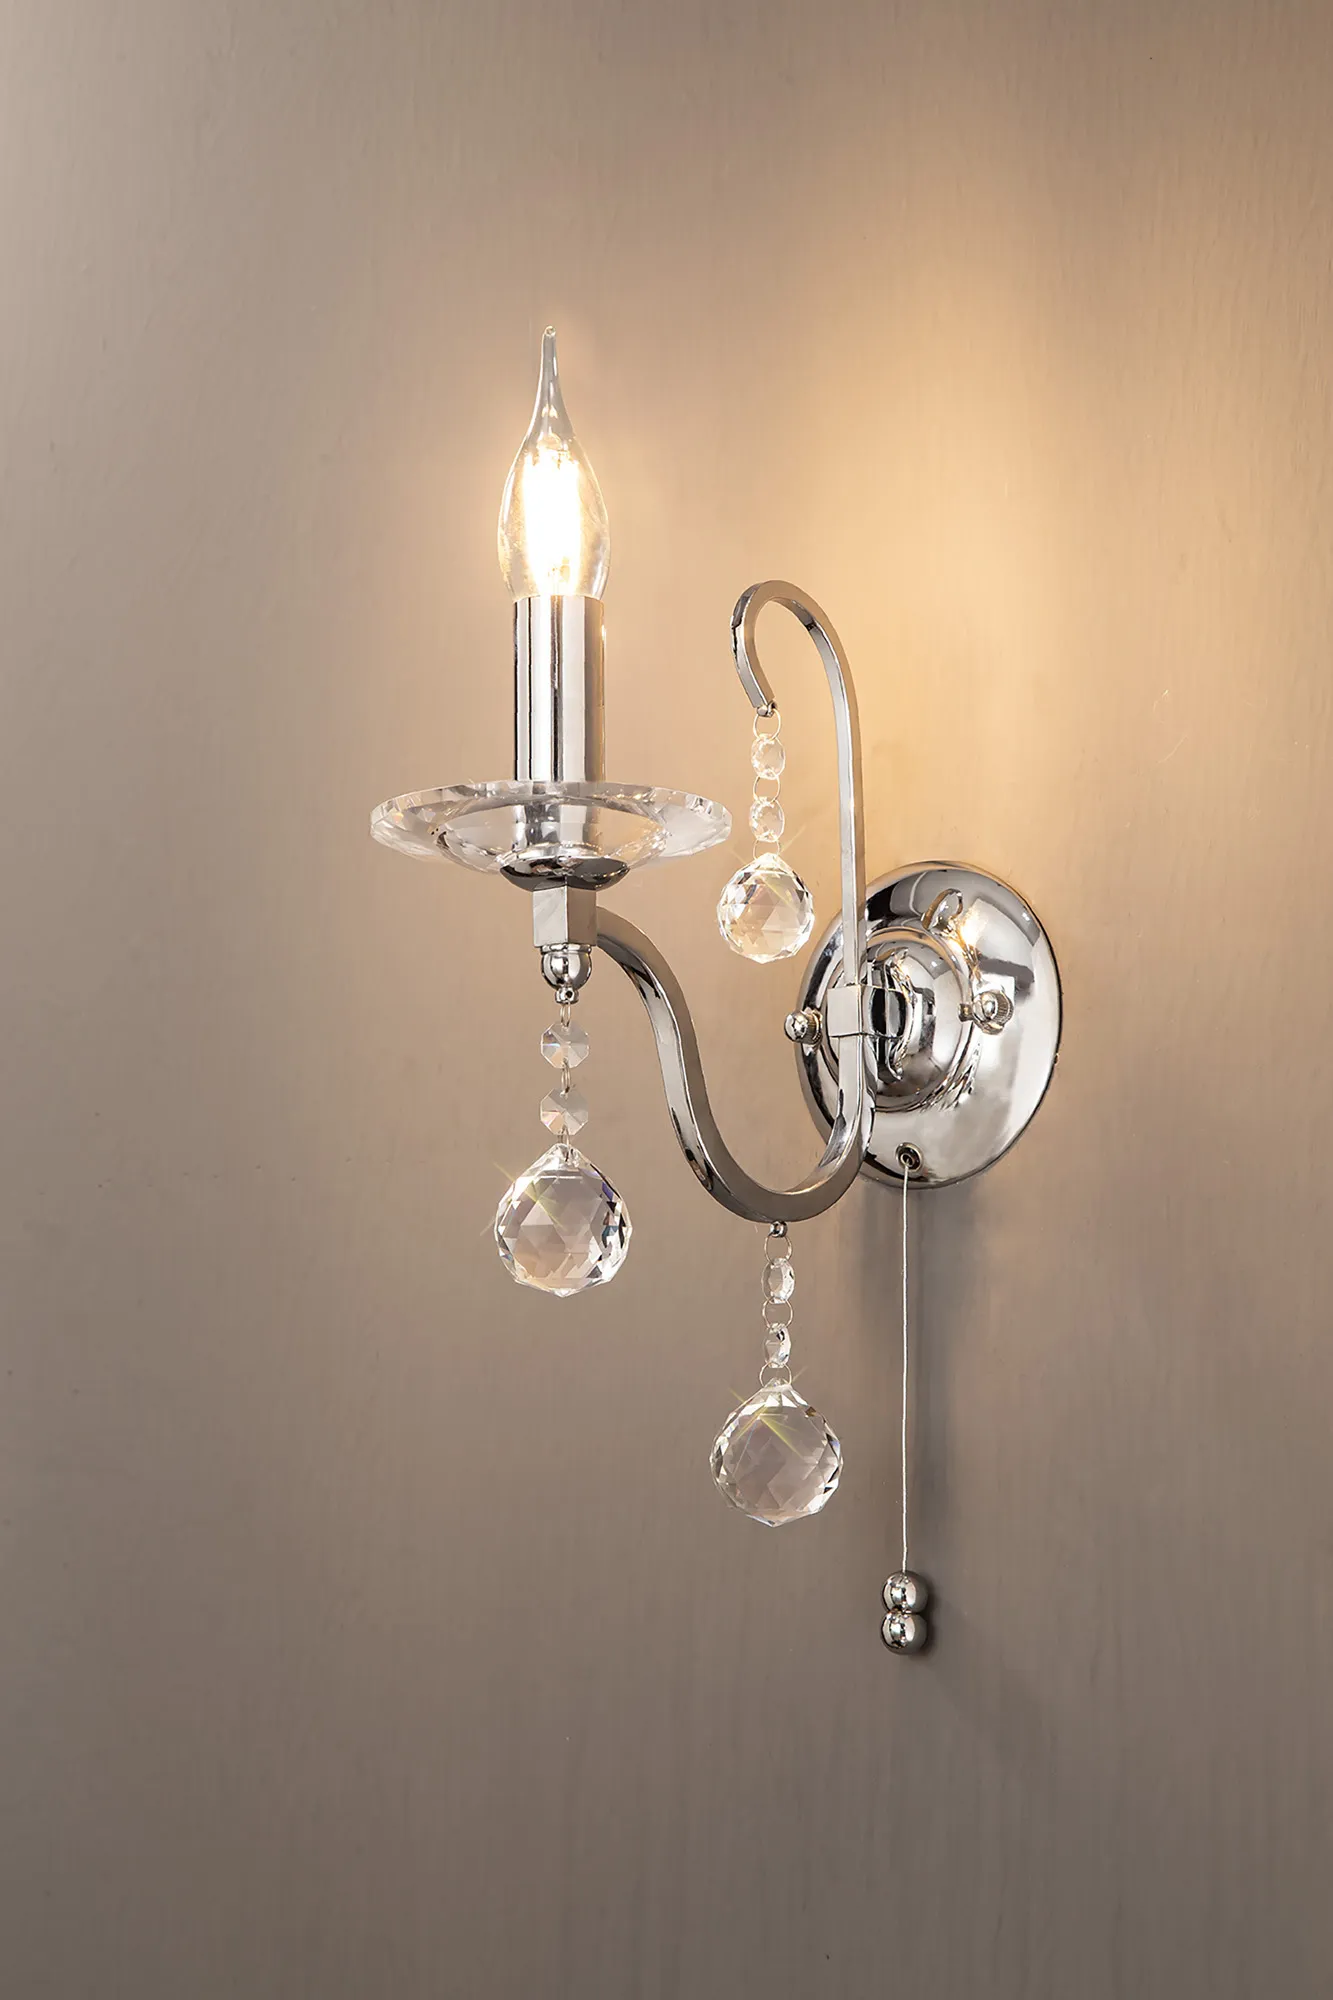 IL30111  Bianco Crystal Switched Wall Lamp 1 Light Polished Chrome